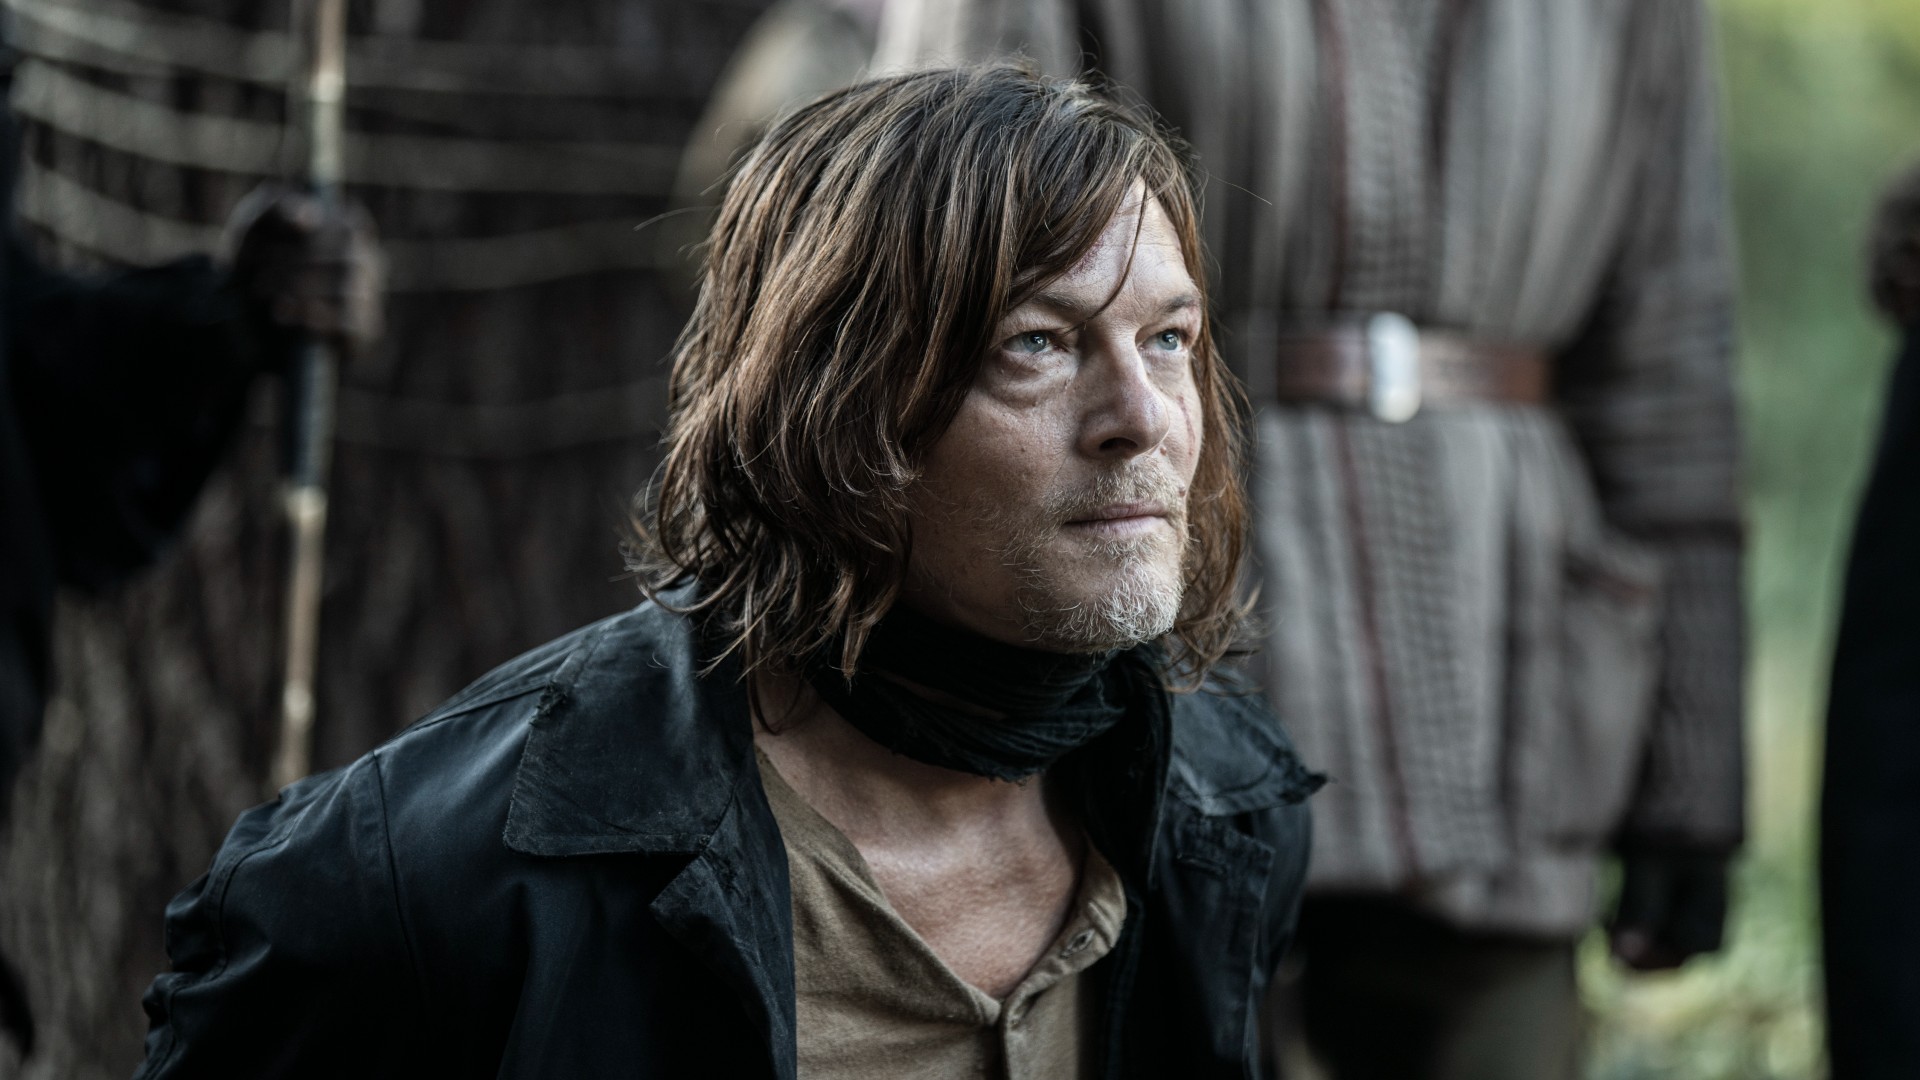 How The Walking Dead Daryl Dixon Will Resemble the TWD Pilot Den of Geek